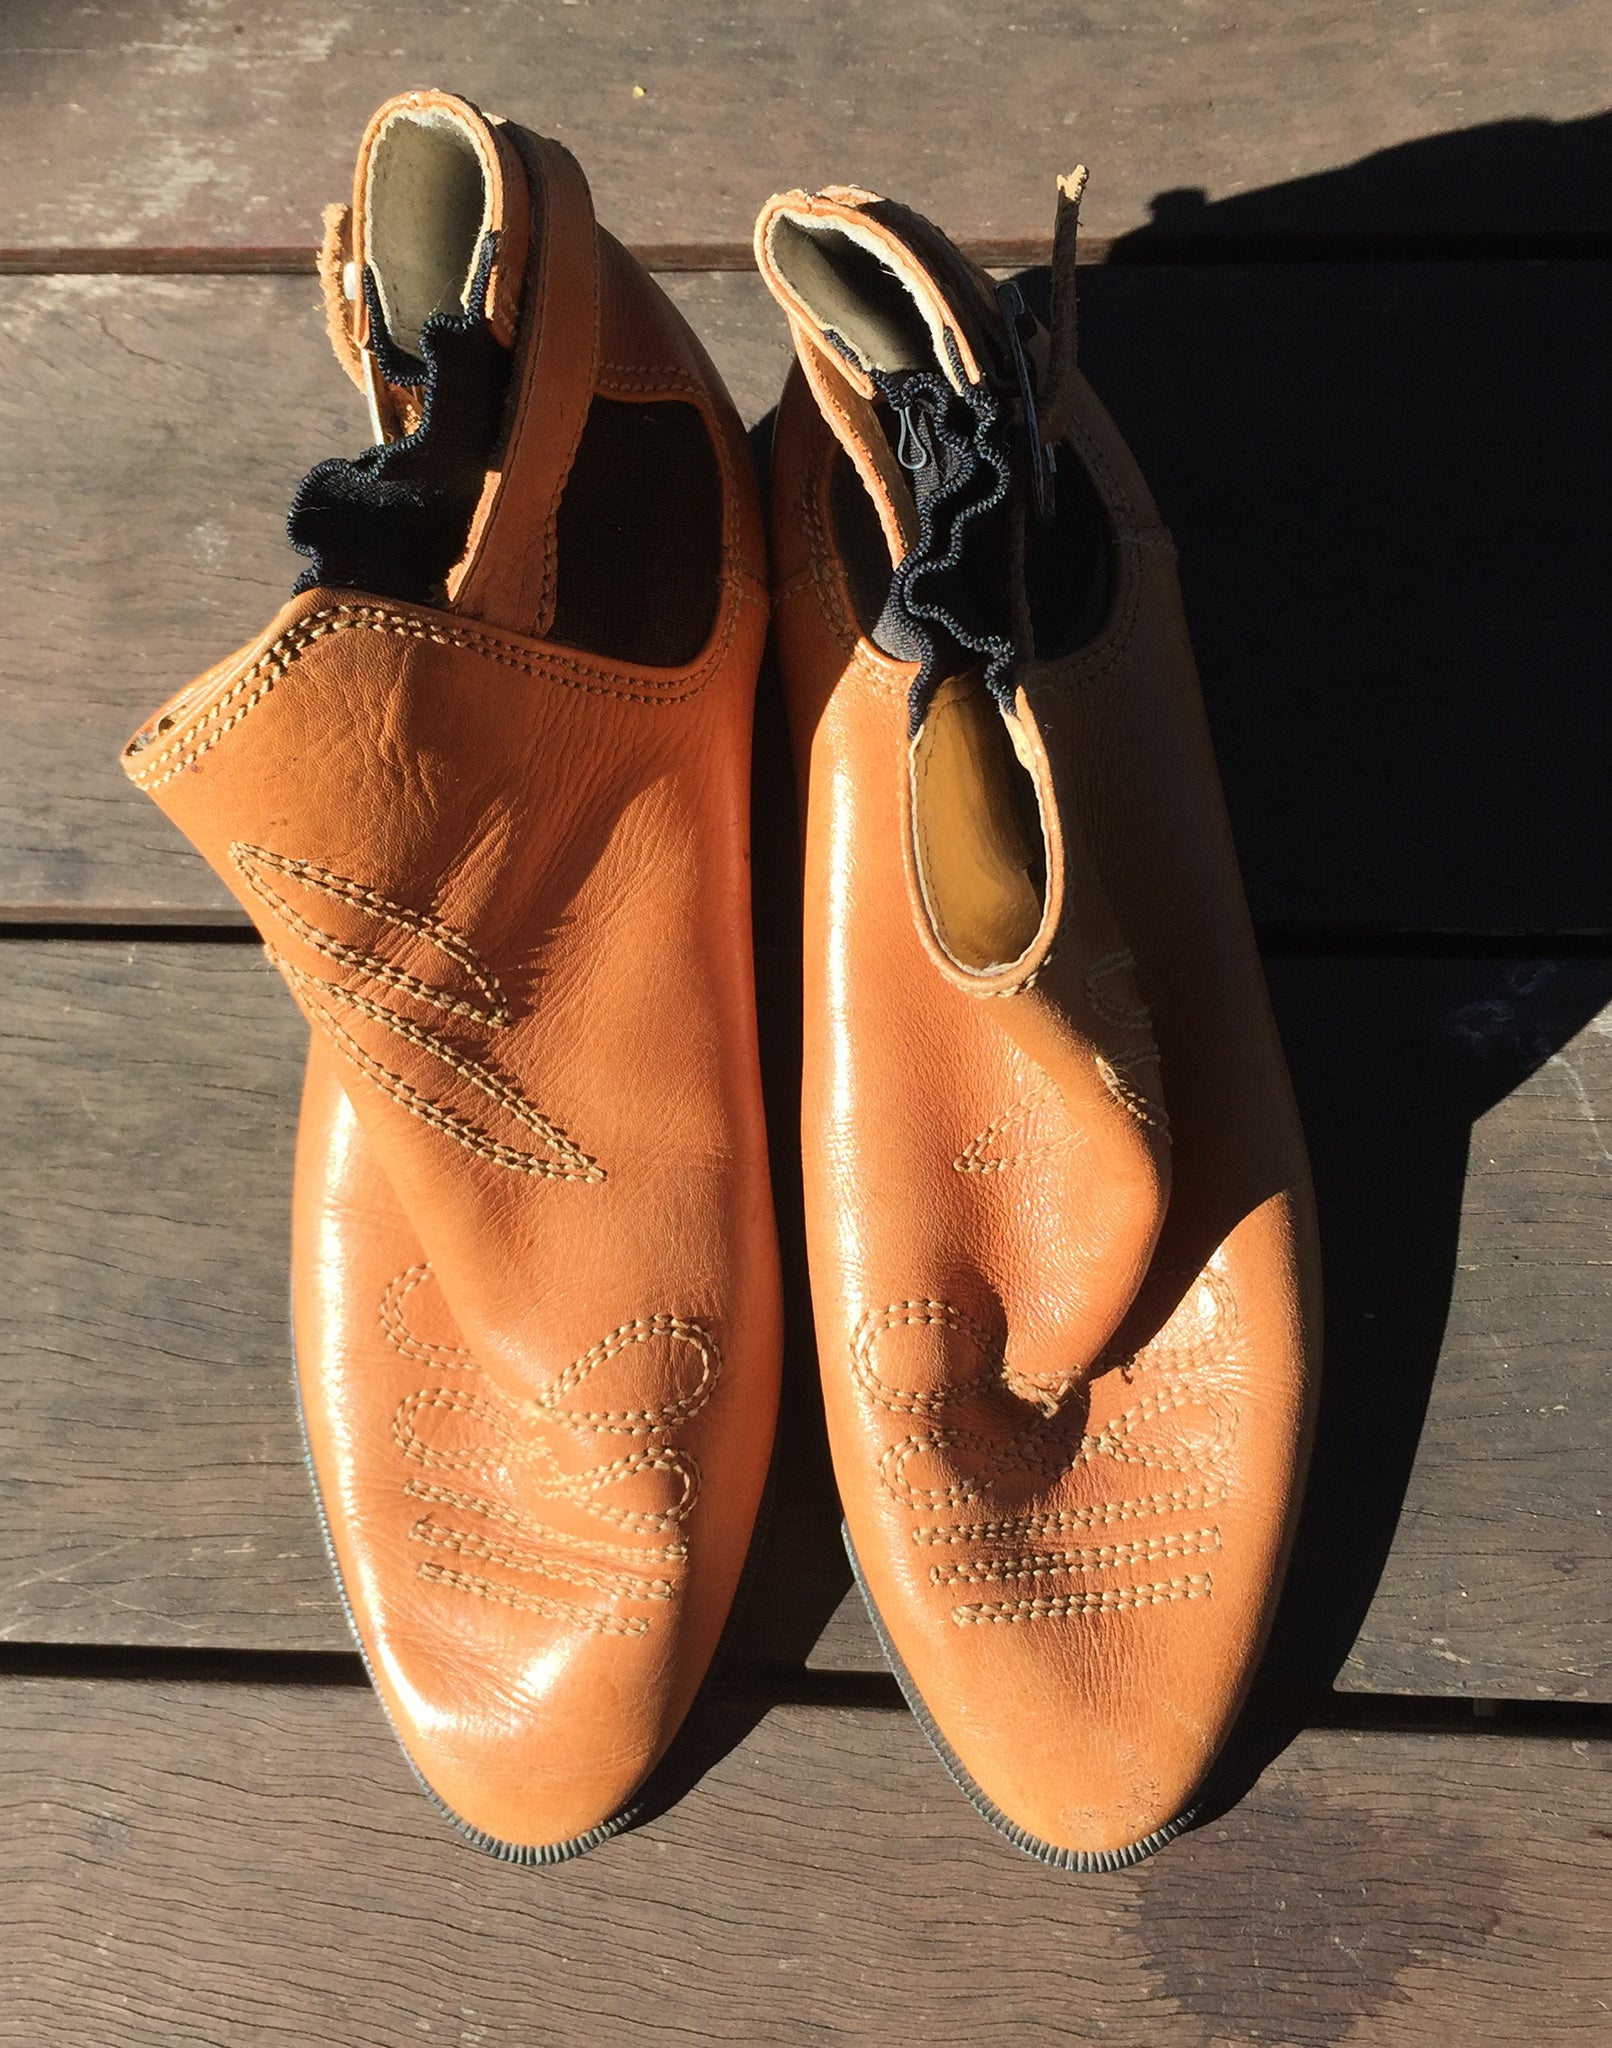 Vintage 90's Tan Mustard Ankle Boots - Size 37